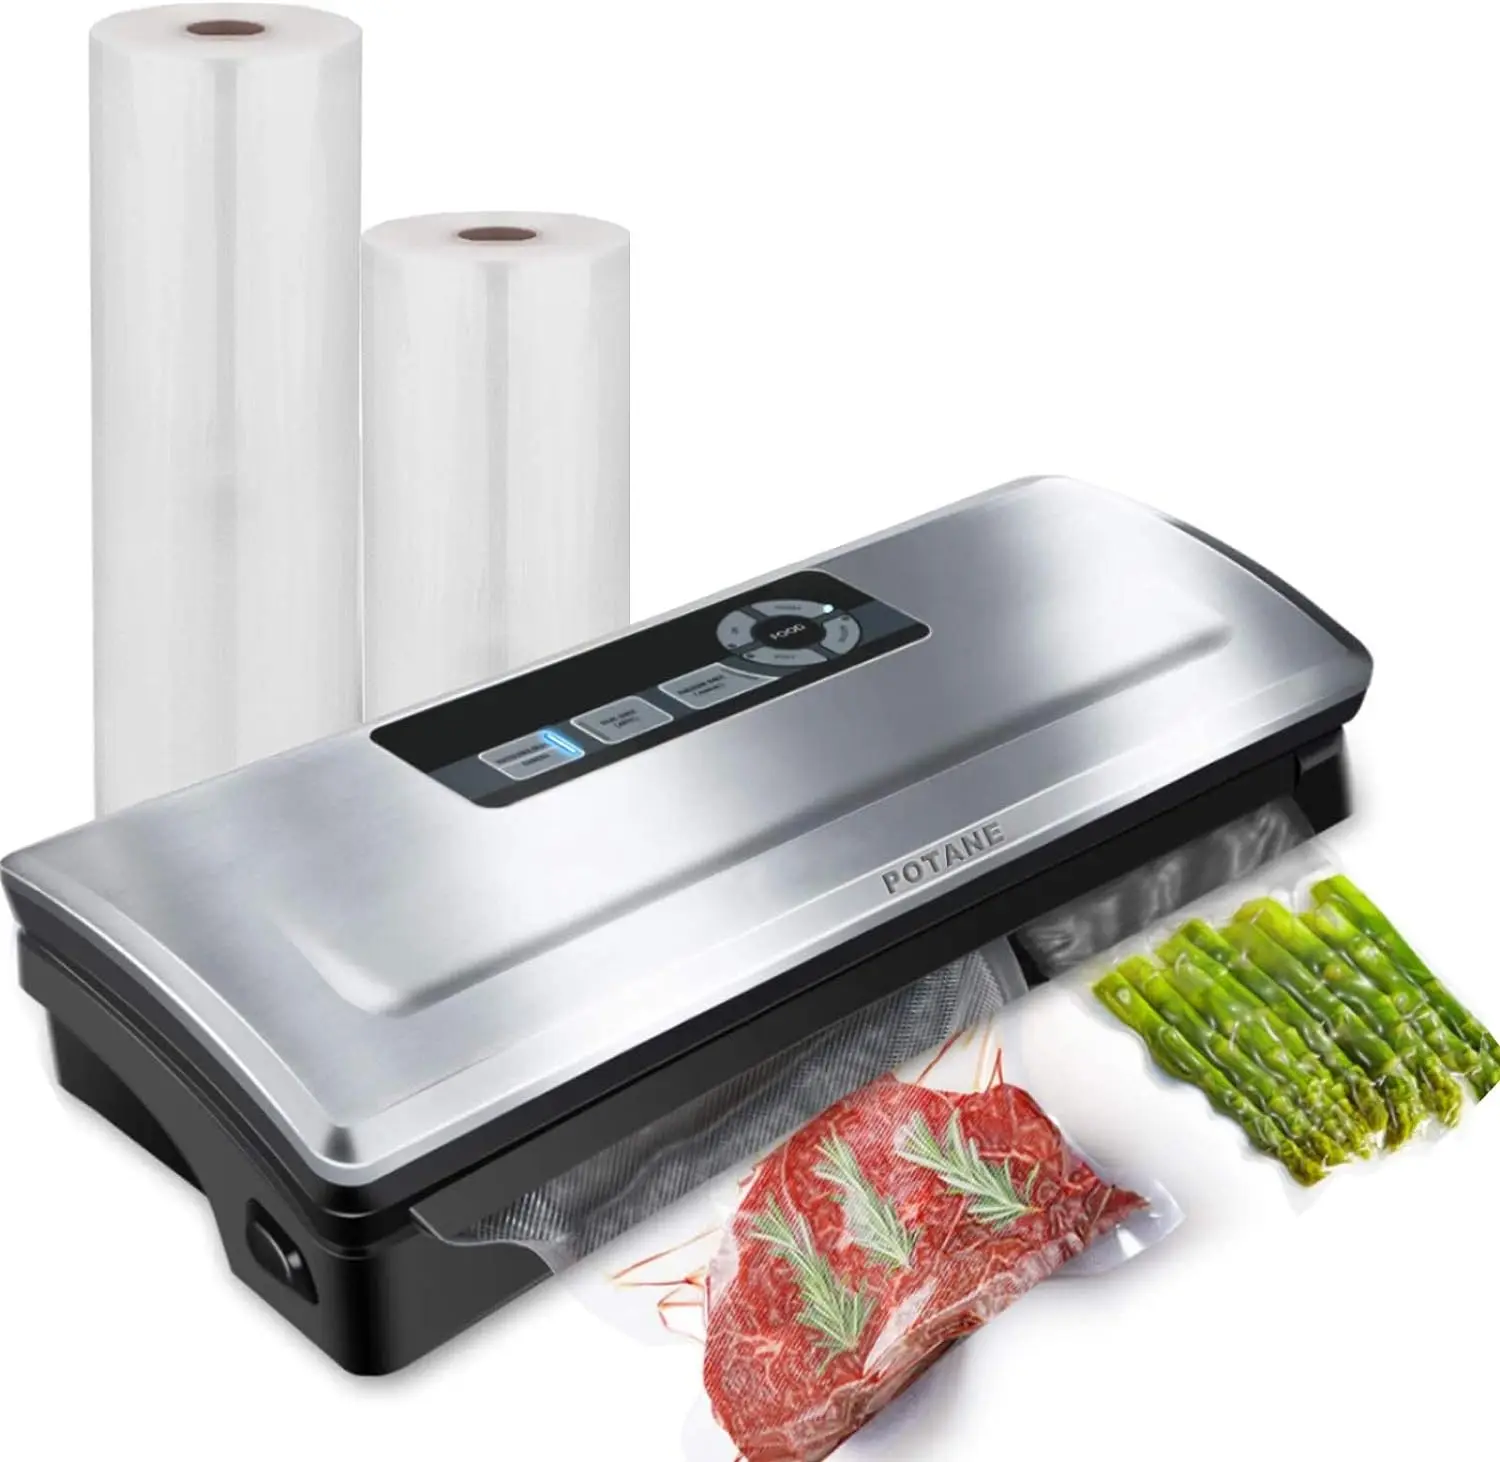 

Sealer Machine, 85kPa Pro Vacuum Food Sealer, 8-in-1 Easy Presets, 4 Food Modes, Dry&Moist&Soft&Delicate with Starte